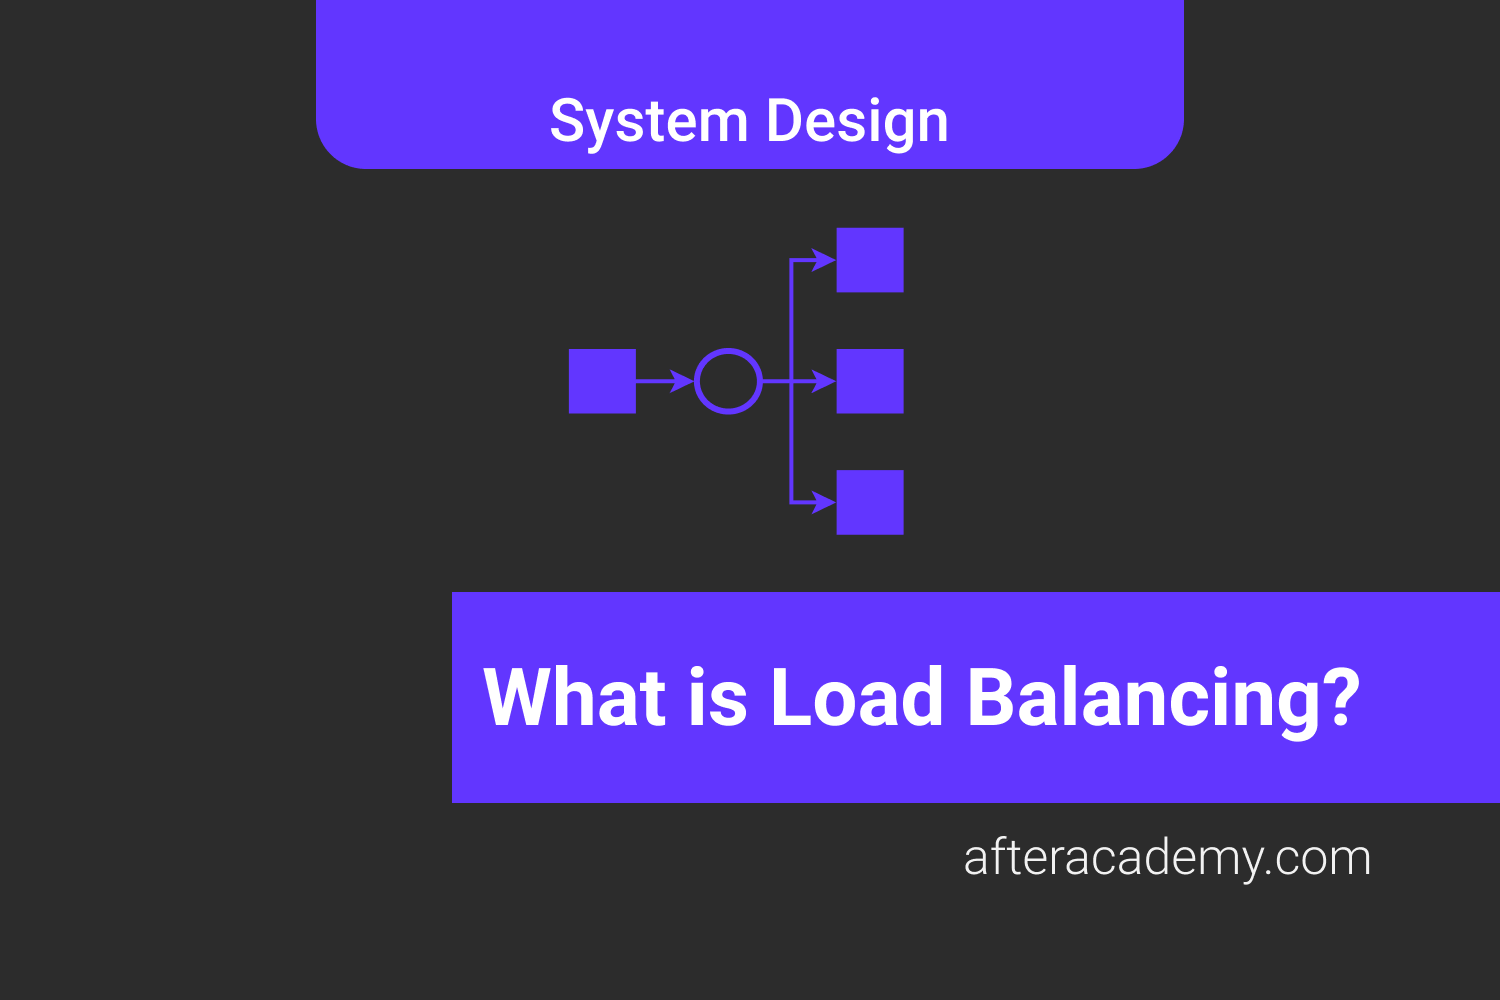 What is Load Balancing? How does it work?